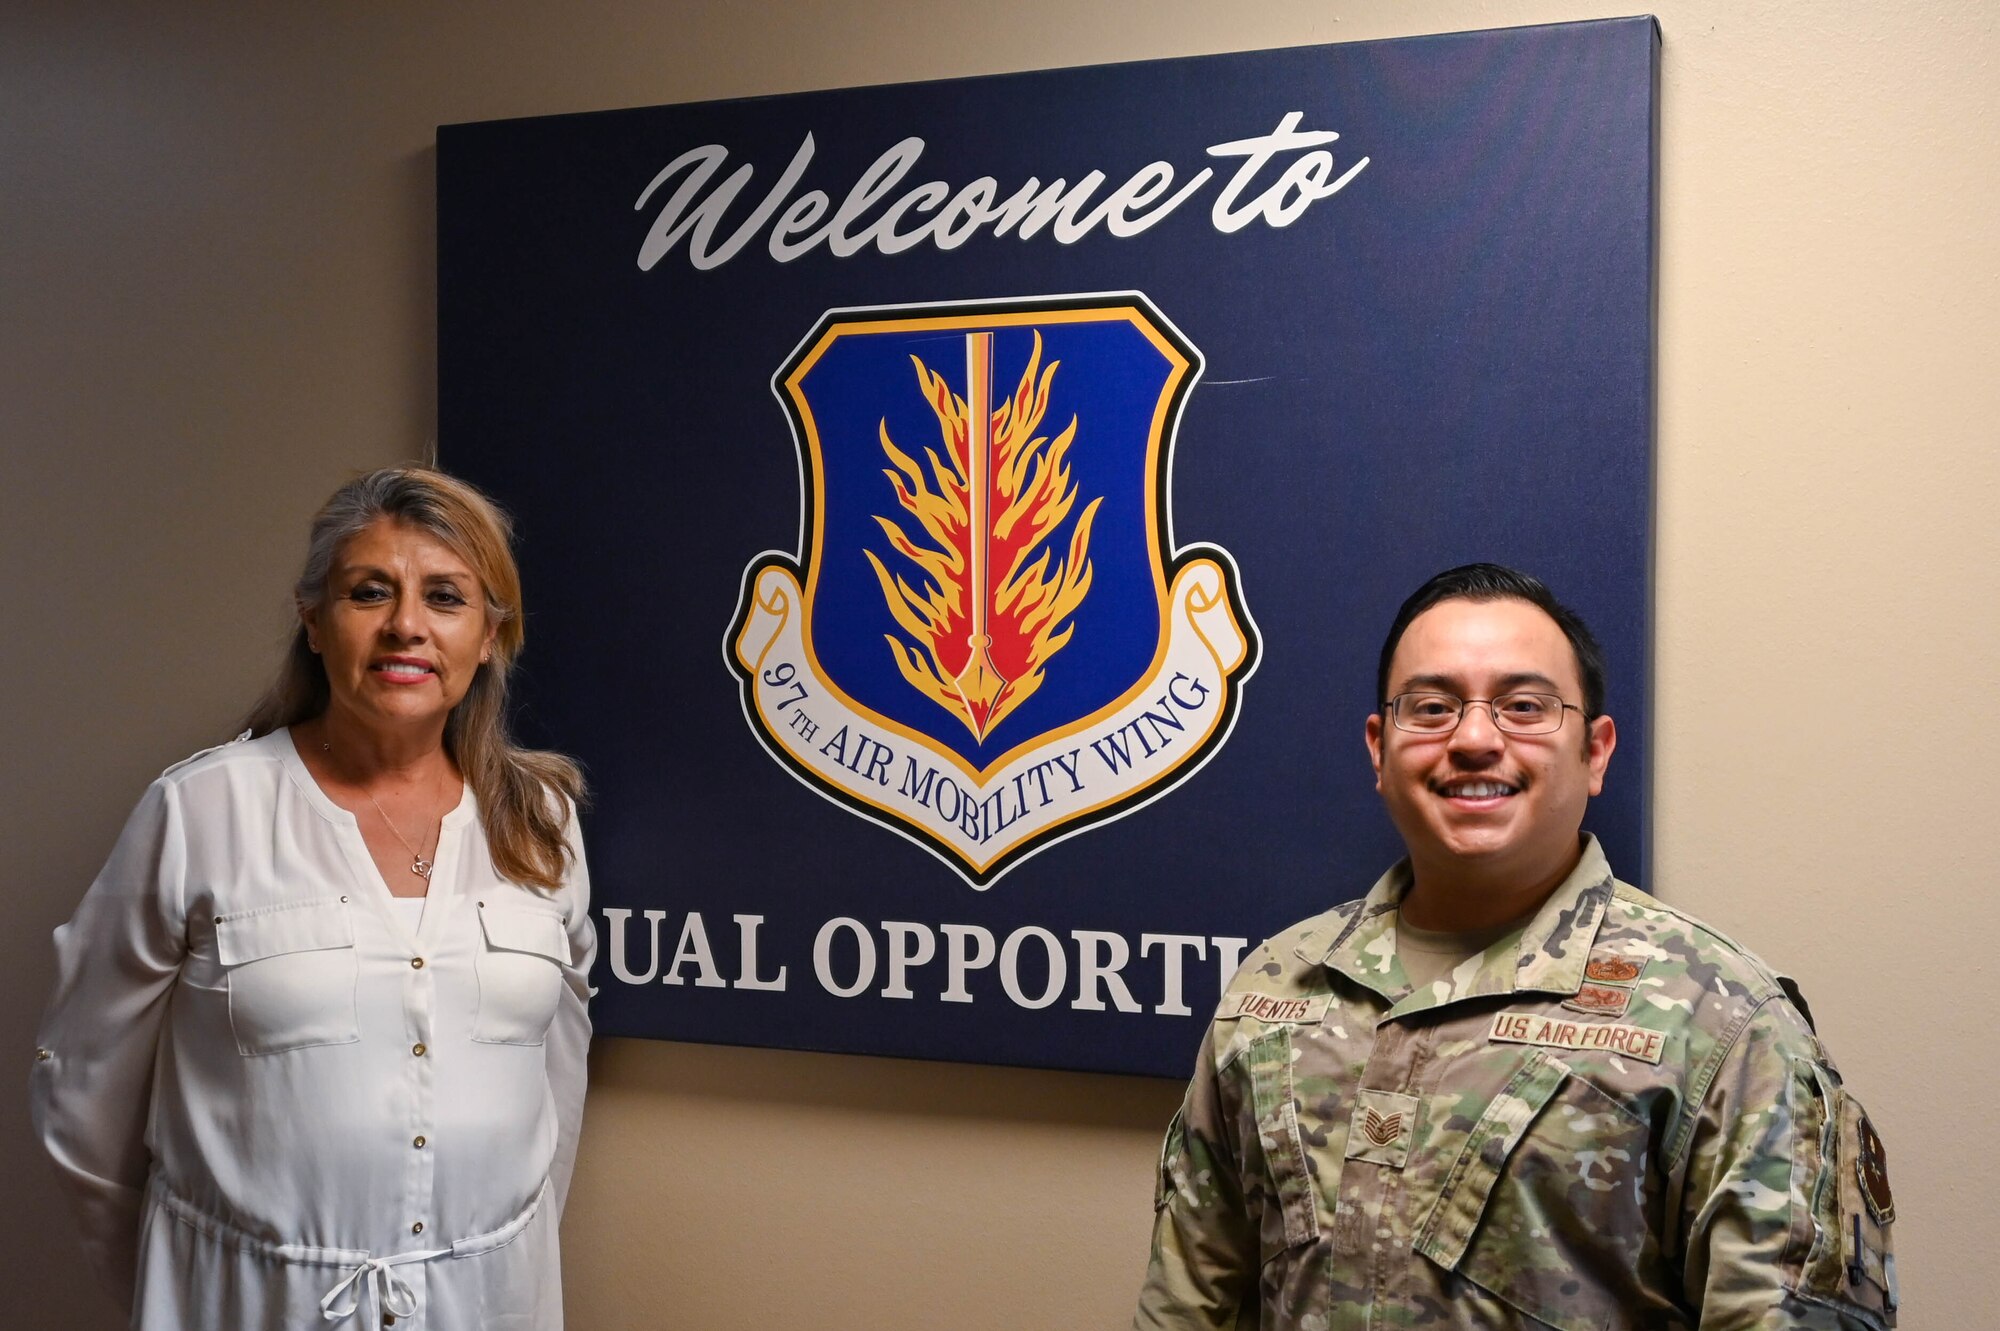 Alma Taylor, 97th Air Mobility Wing Equal Opportunity specialist (left) and U.S. Air Force Tech. Sgt. Jose Fuentes Jr, 97th Air Mobility Wing Equal Opportunity Program director (right), gather for a photo inside the Airmen Resiliency Center at Altus Air Force Base, Oklahoma, Aug. 16, 2023. The Equal Opportunity Program was created to identify and prohibit all forms of unlawful discrimination, harassment and retaliation within the U.S. Air Force. (U.S. Air Force photo by Airman 1st Class Heidi Bucins)